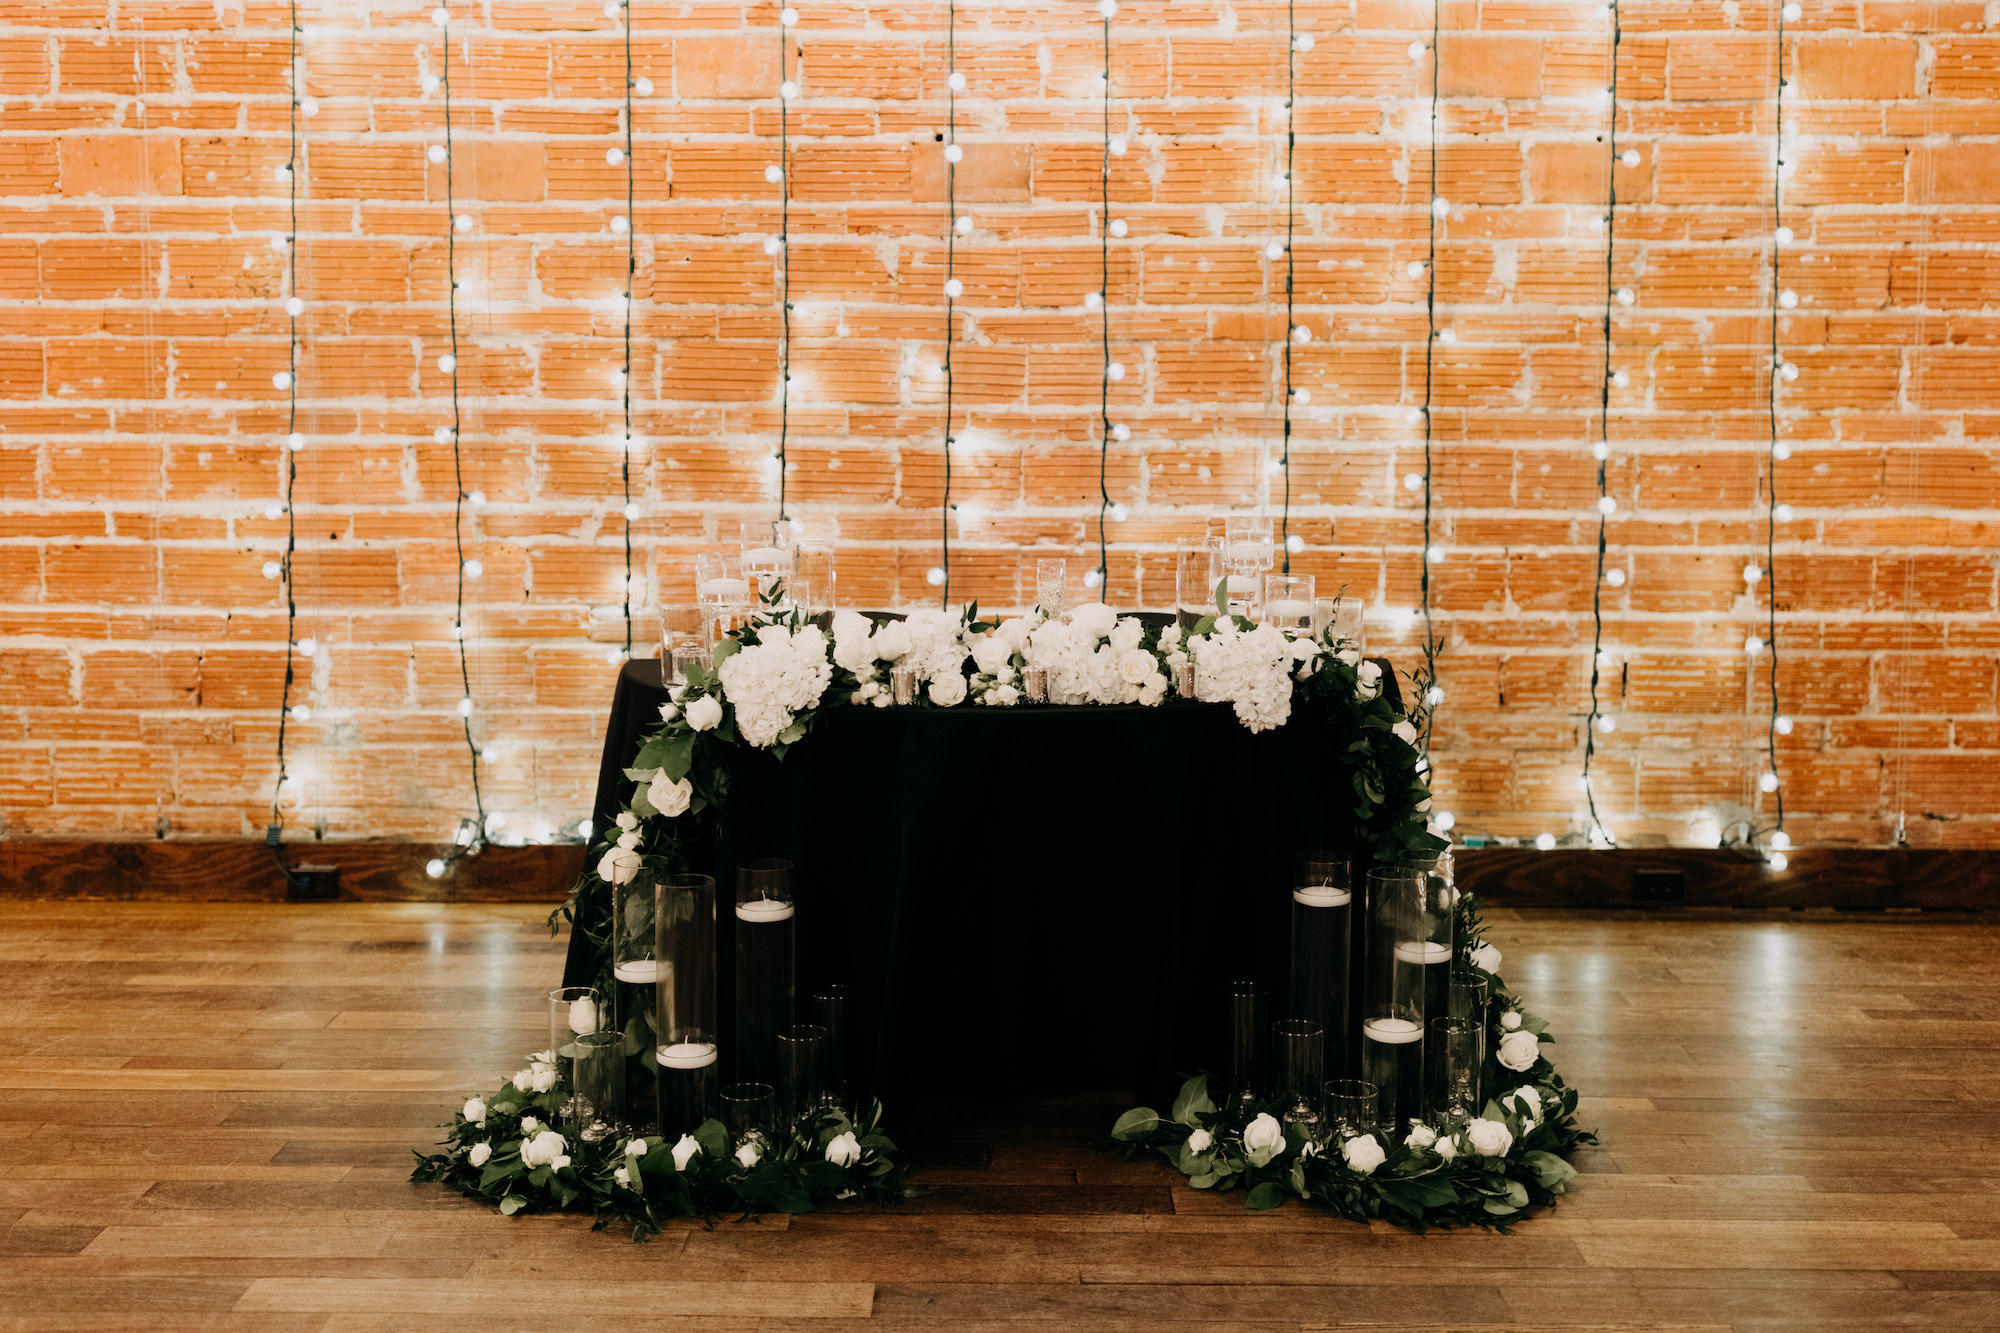 Simple Classic Black and White Wedding Reception Decor, Sweetheart Table with Floating Candles, White Hydrangeas Flowers, Red Brick Wall Backdrop and Hanging Lights | Tampa Bay Wedding Photographer Amber McWhorter Photography | Unique Industrial Wedding Venue NOVA 535 | Wedding Florist Save the Date Florist